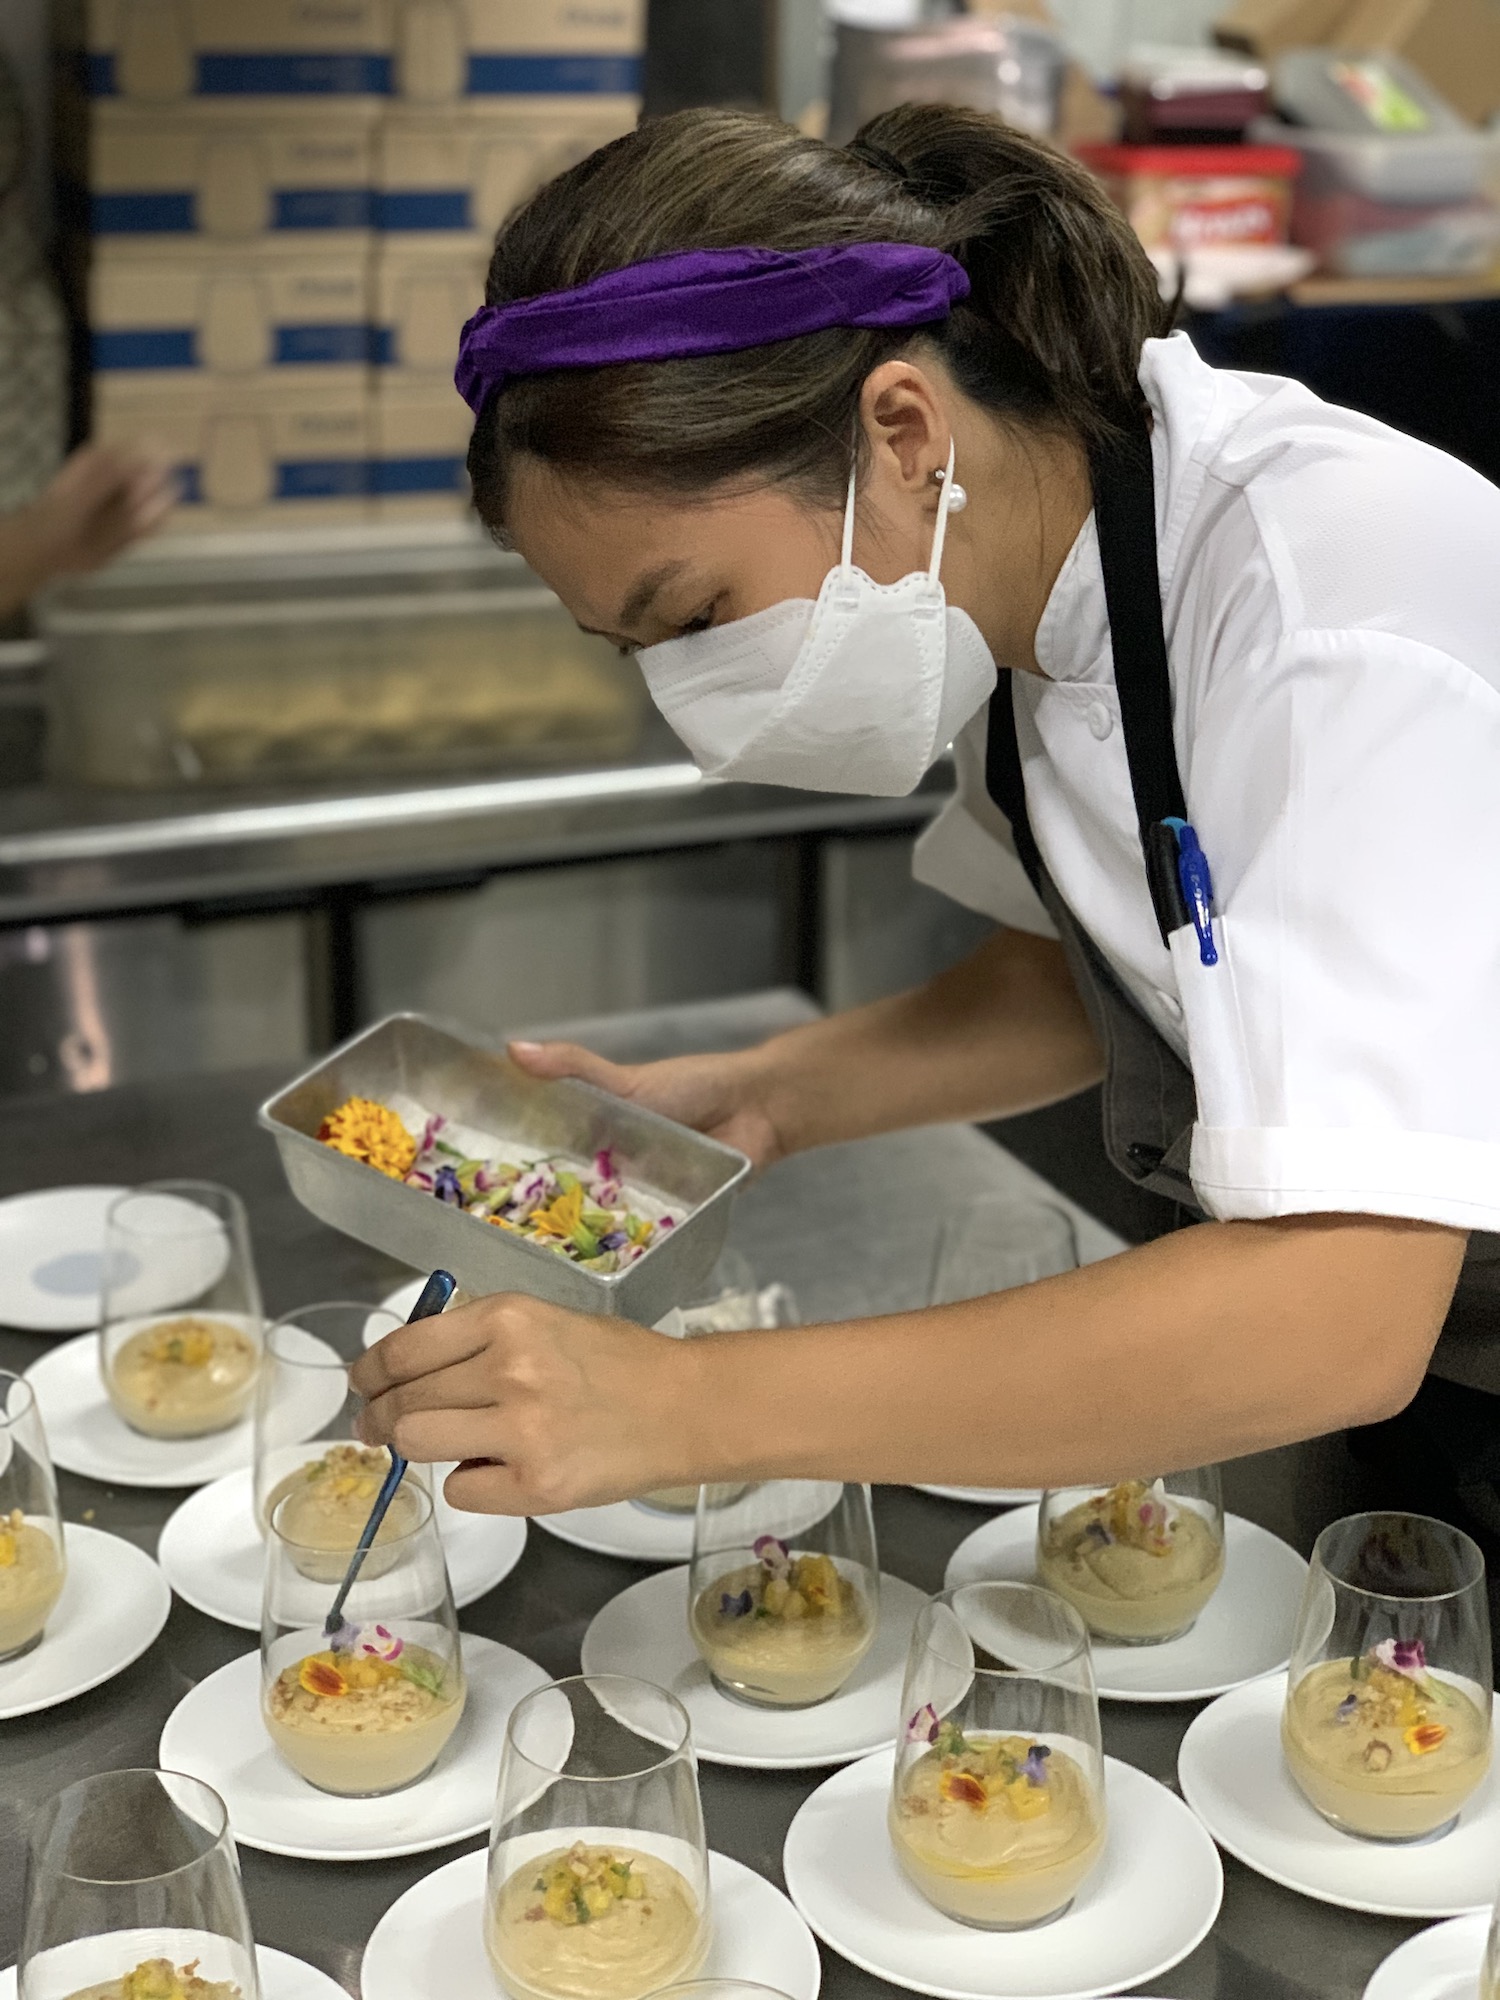 From Cebu to Alinea in Chicago, Charmine Go's journey has been anything but easy